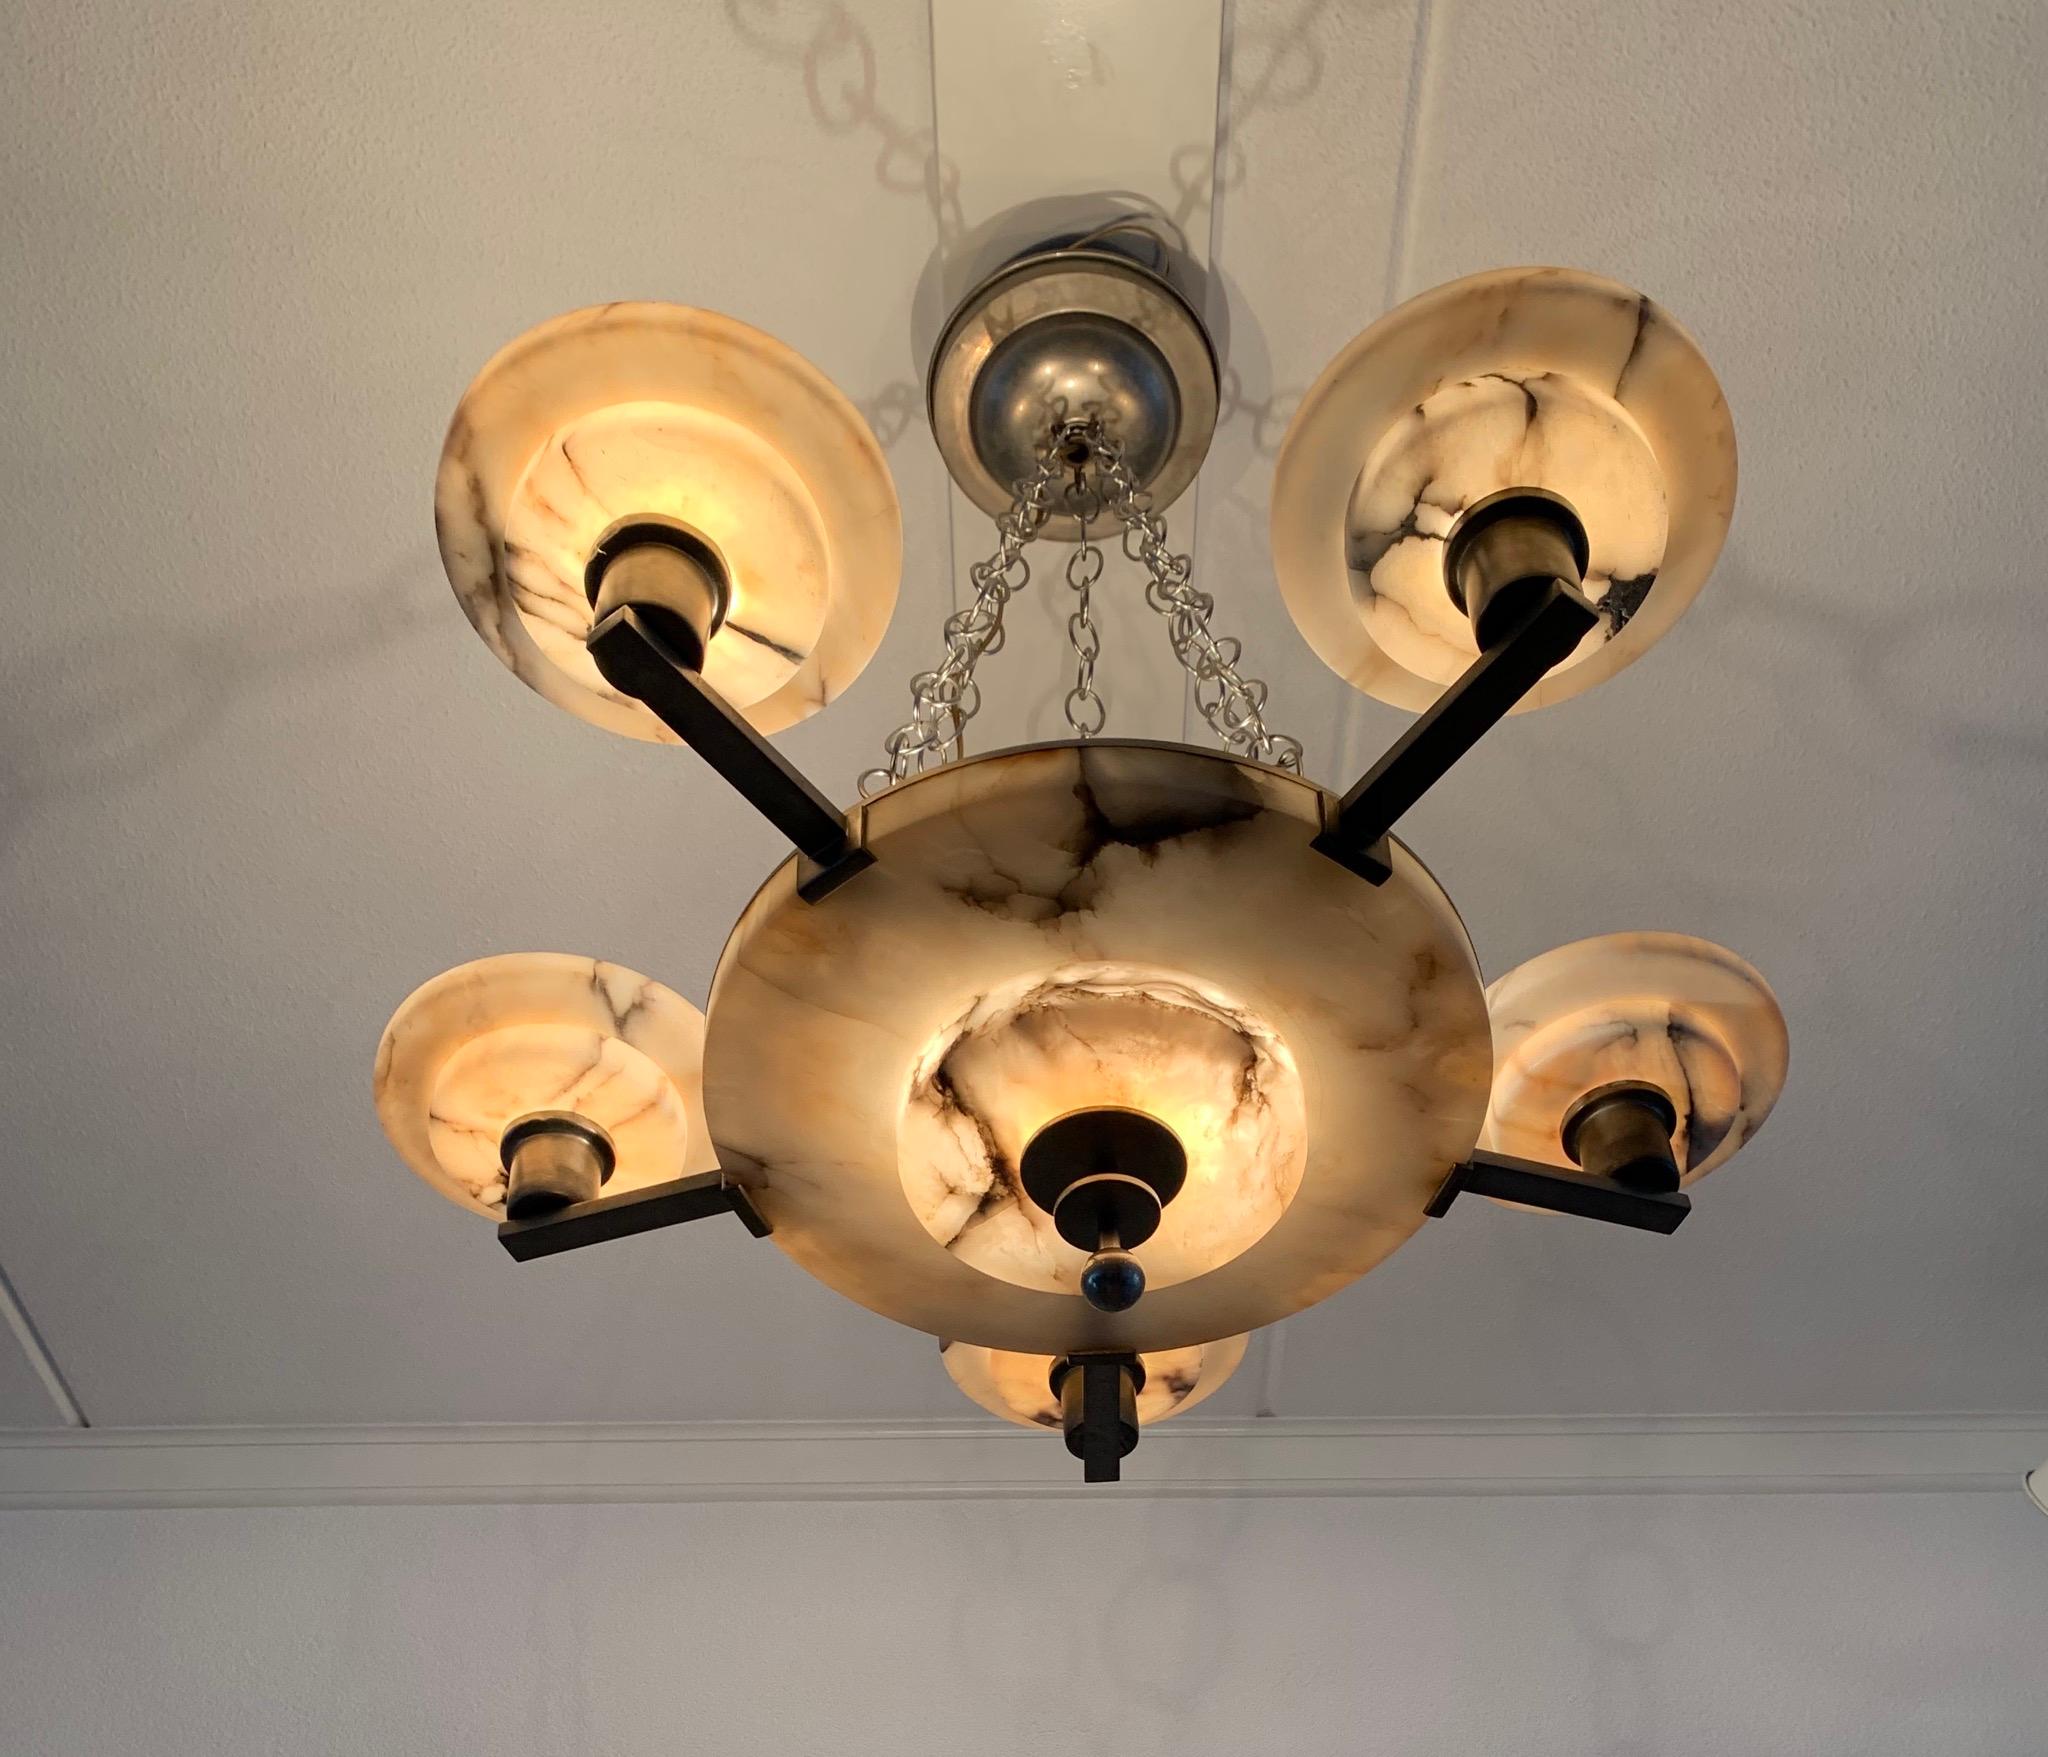 Top quality chandelier with nickel plated brass arms and striking alabaster shades.
 
If you are looking for a truly stylish light fixture that also creates enough light above your dining table or in the center of your entry hall then this